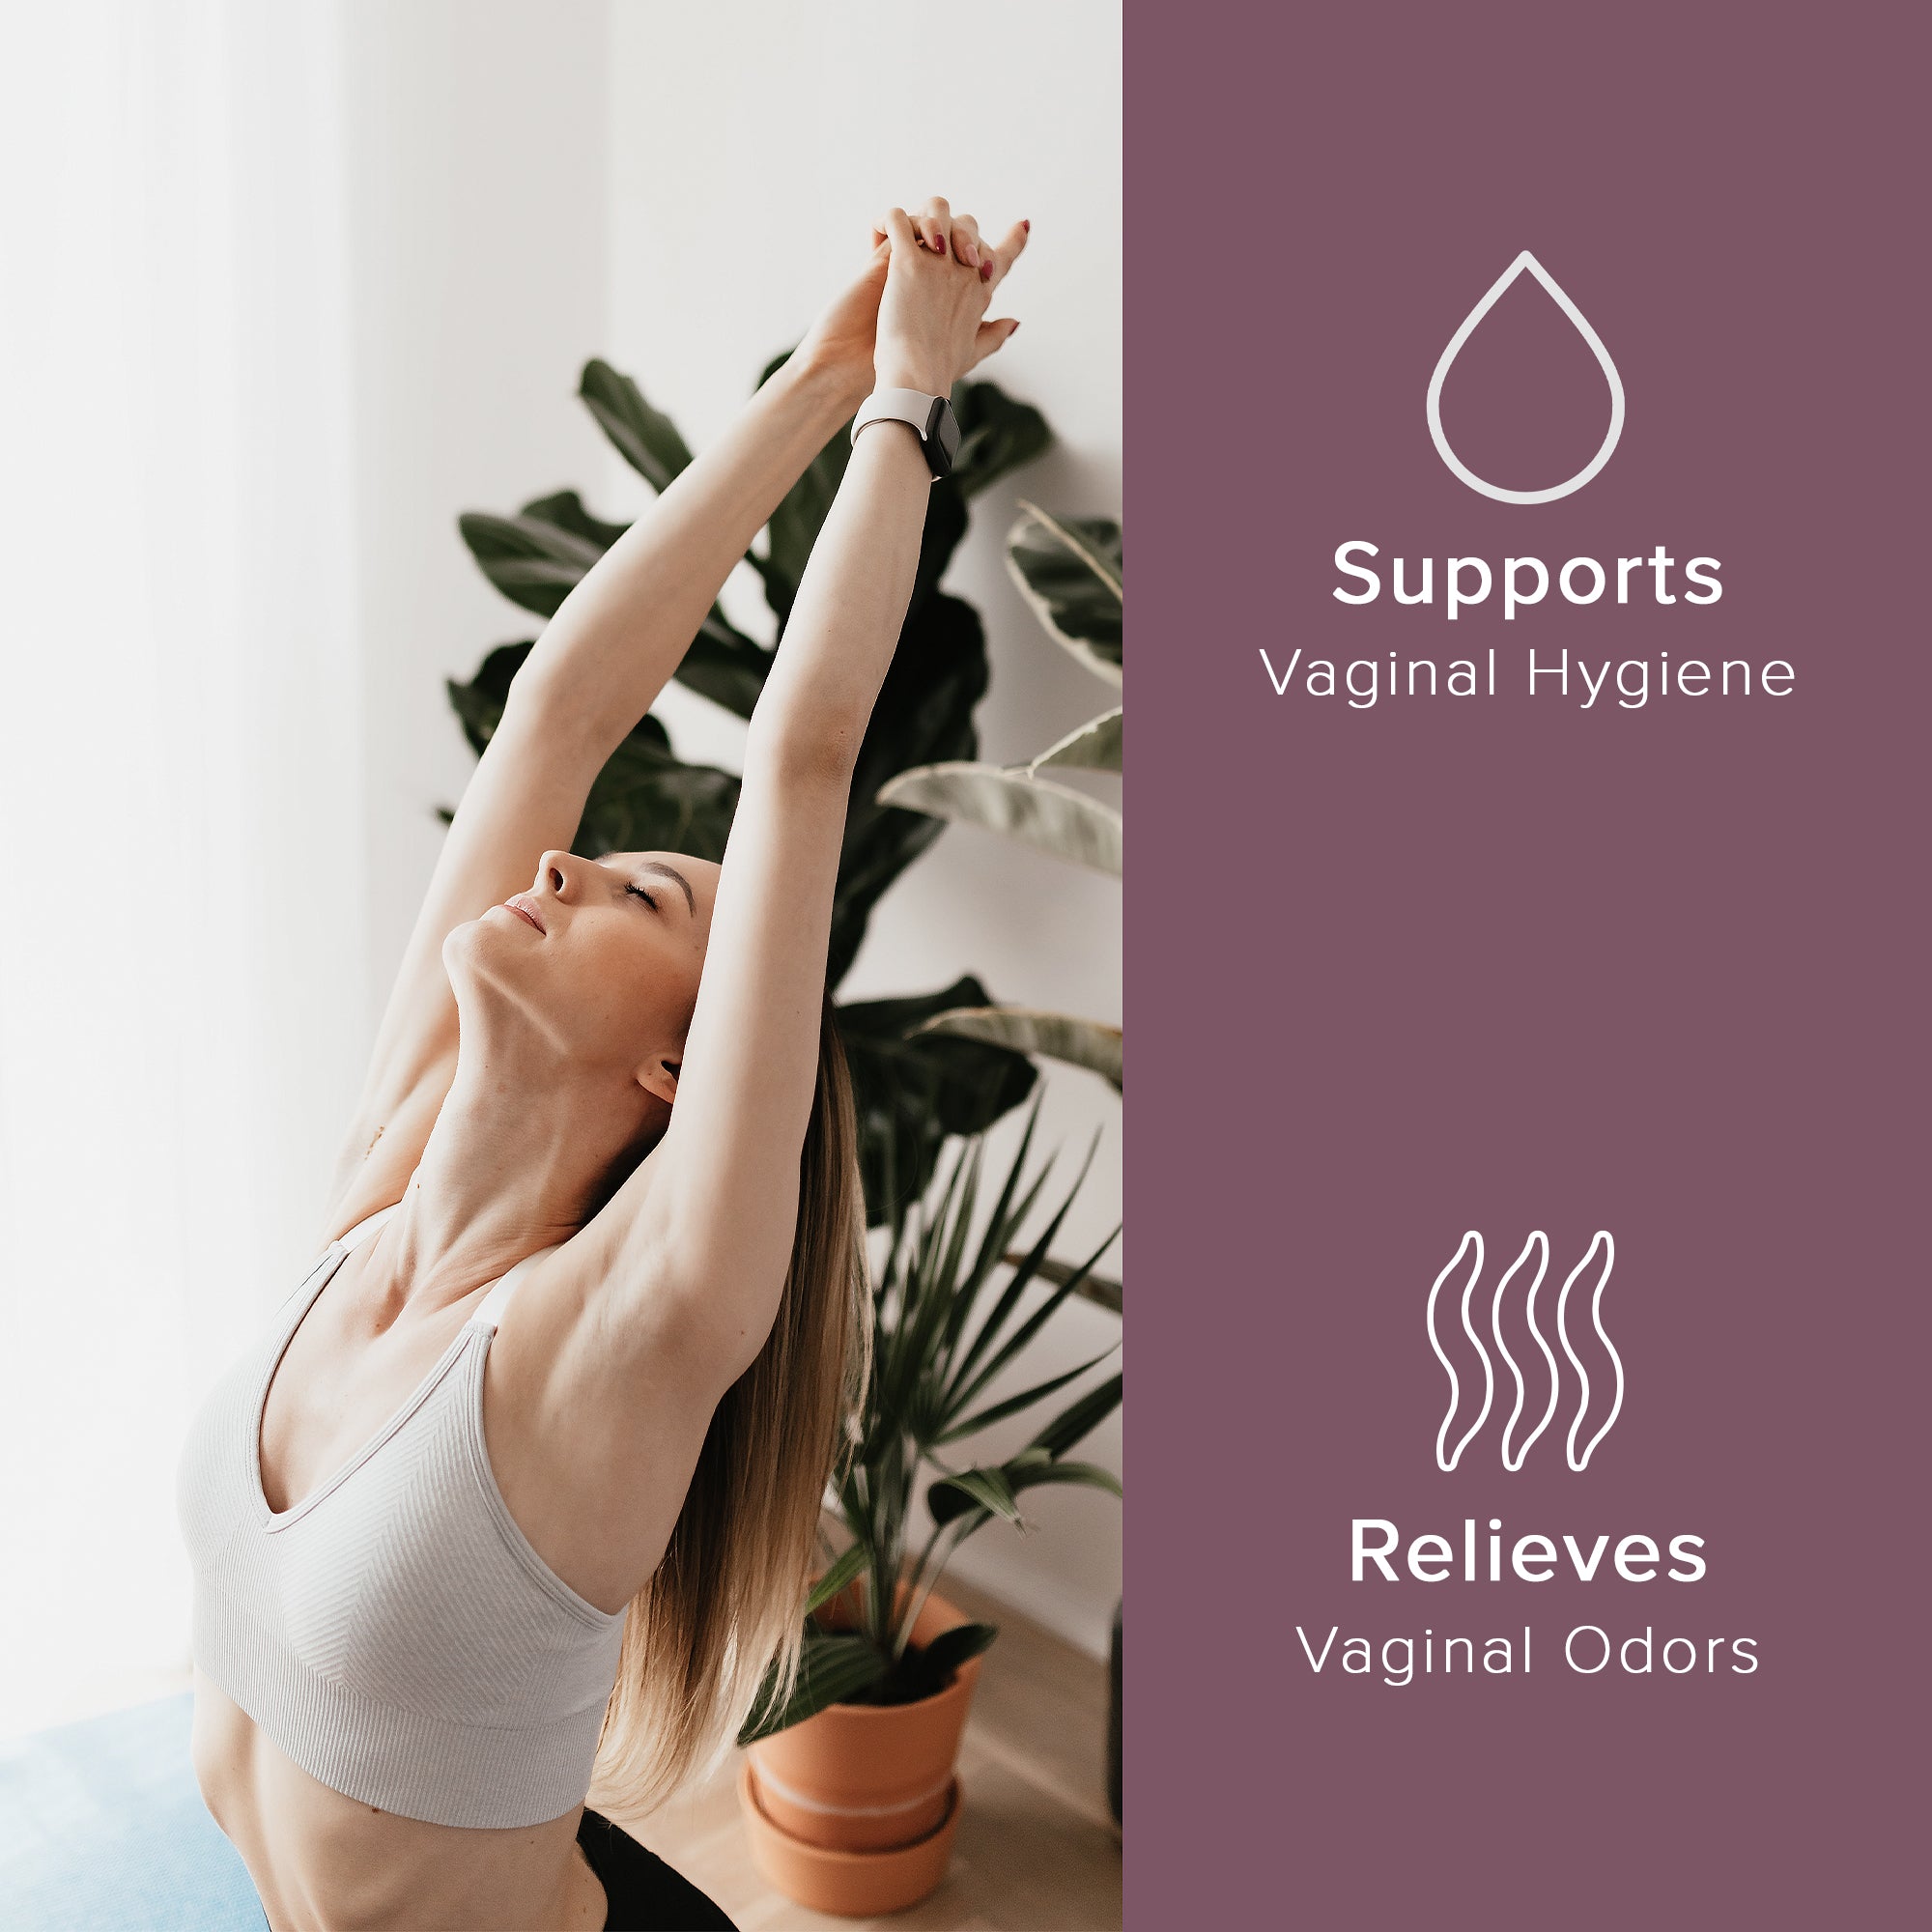 DR. SCHAVIT FEMOXIL Vaginal Suppositories - Natural Plant-Based Formula for The Treatment of Bacterial, Viral and Yeast Infection of The Vagina. Provides Fast Soothing Relief - pH Balance and Health